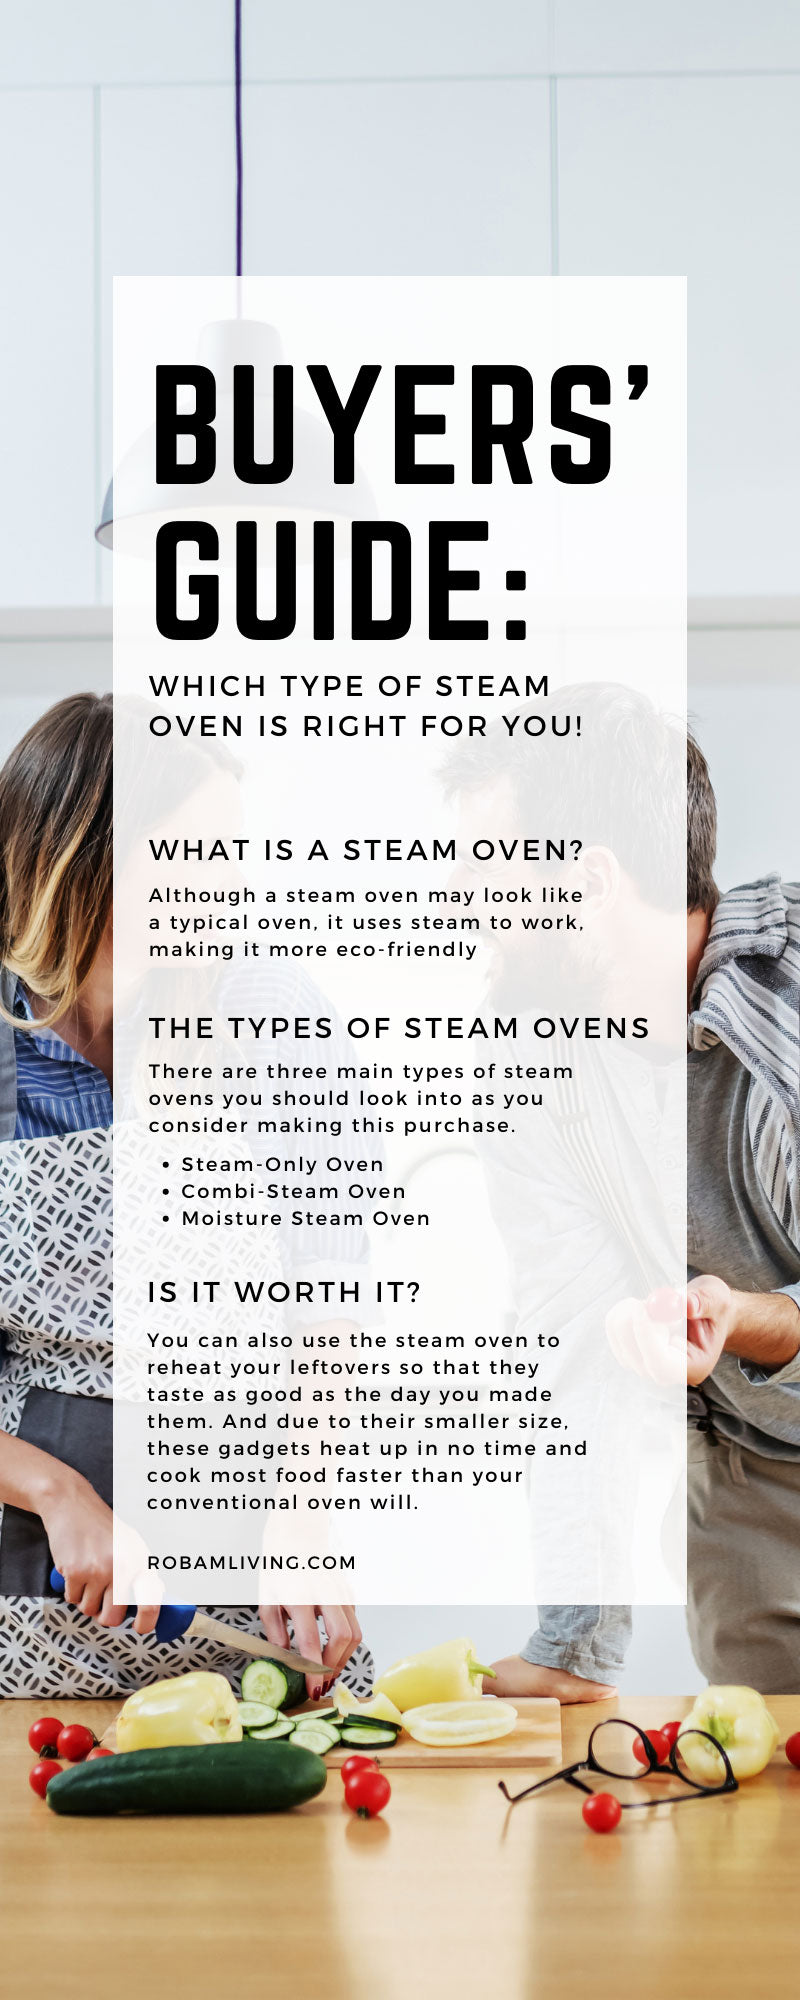 Why Steam Food & Tips for Doing it Right